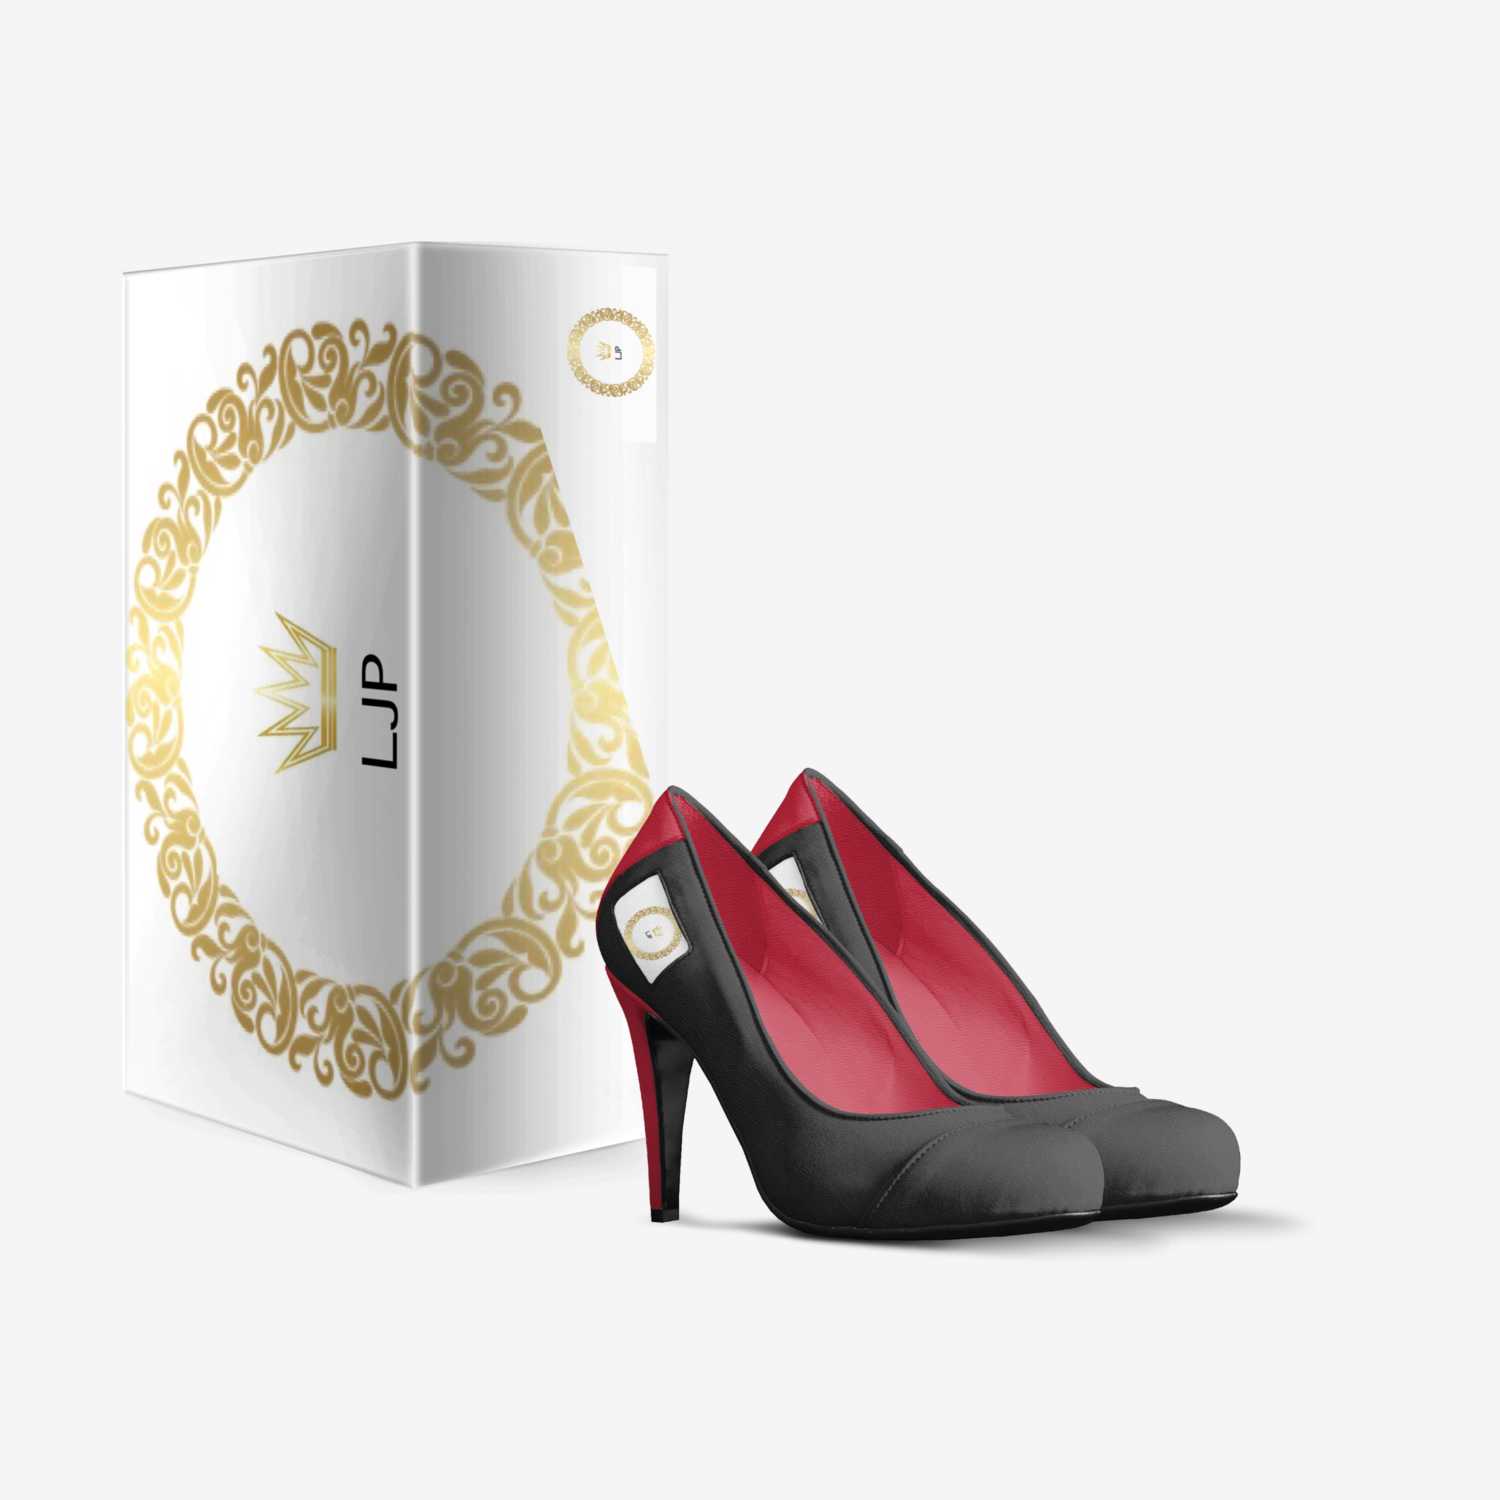 Lady J custom made in Italy shoes by Jeanette Pau | Box view